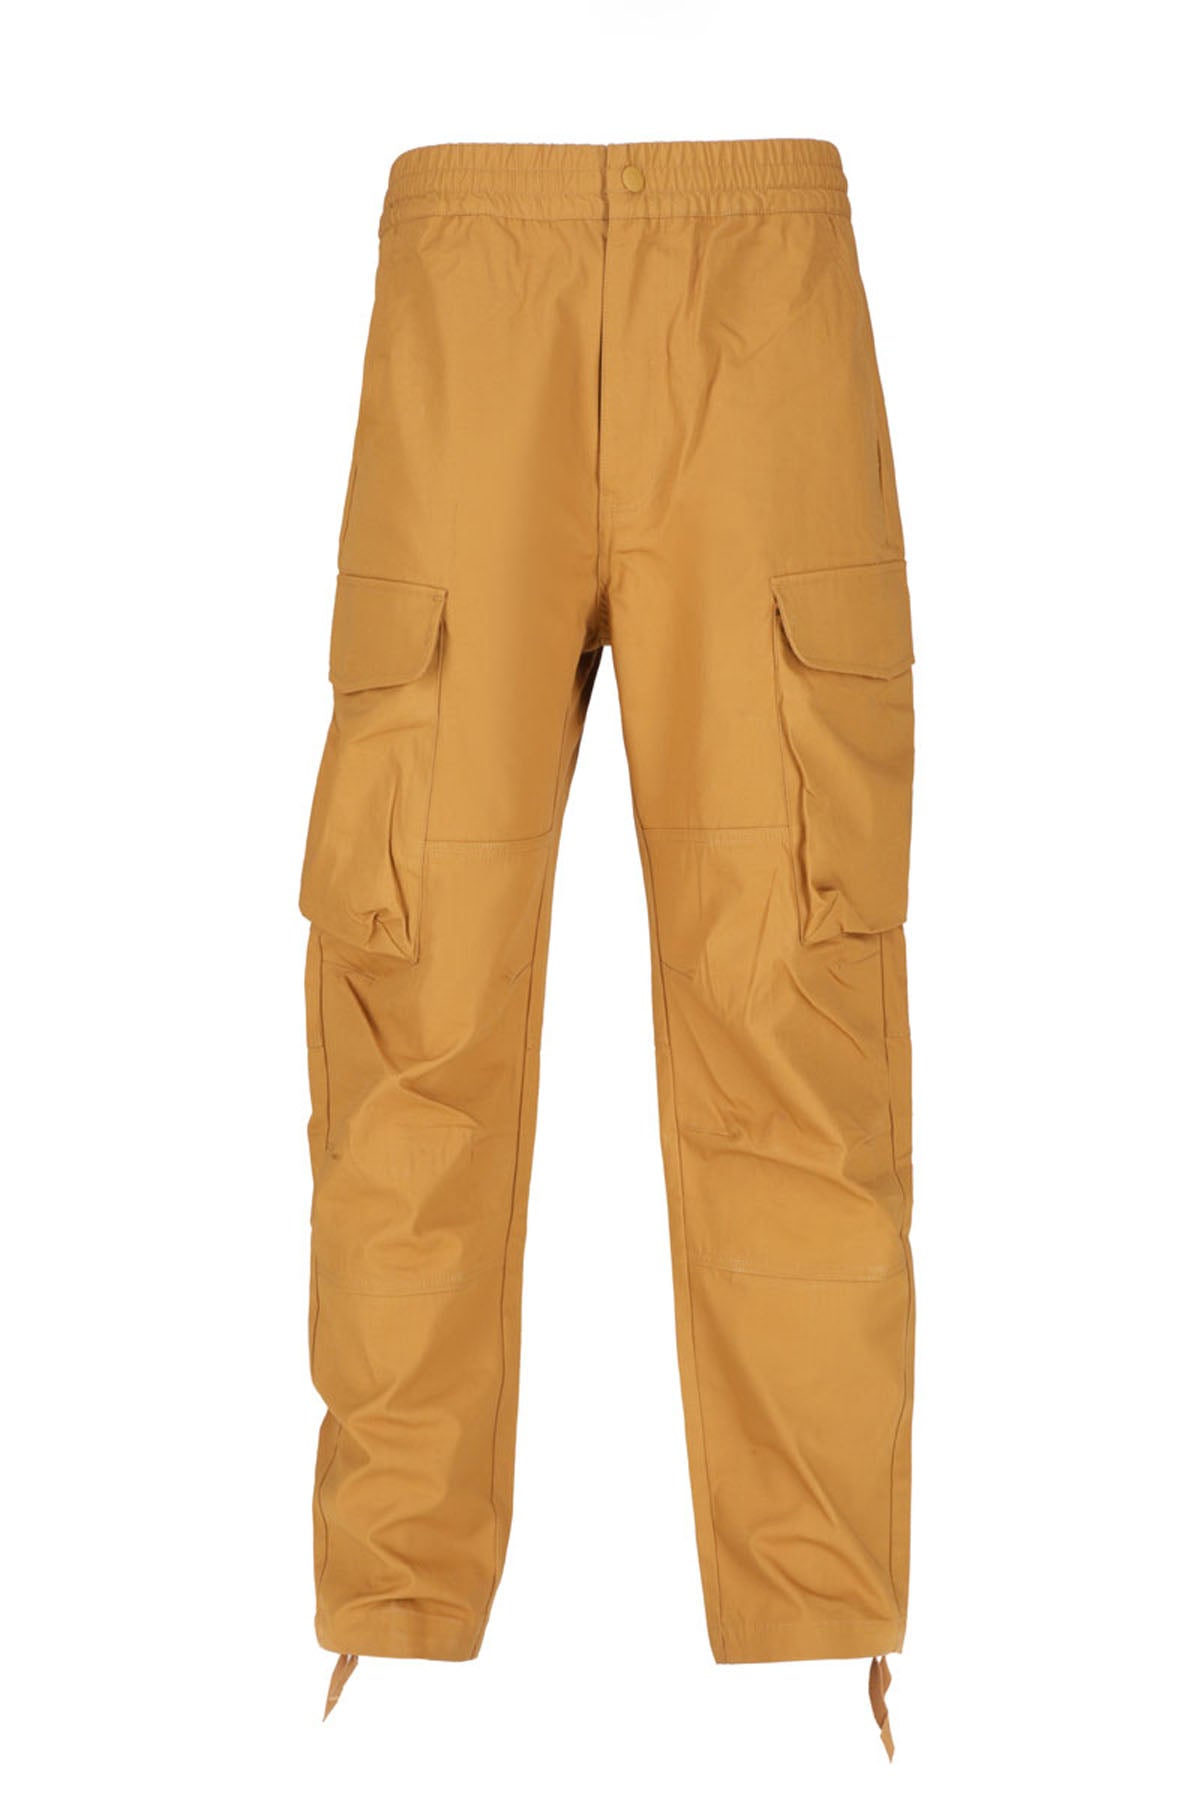 Converse Counter Climate Cargo Pant Wheat